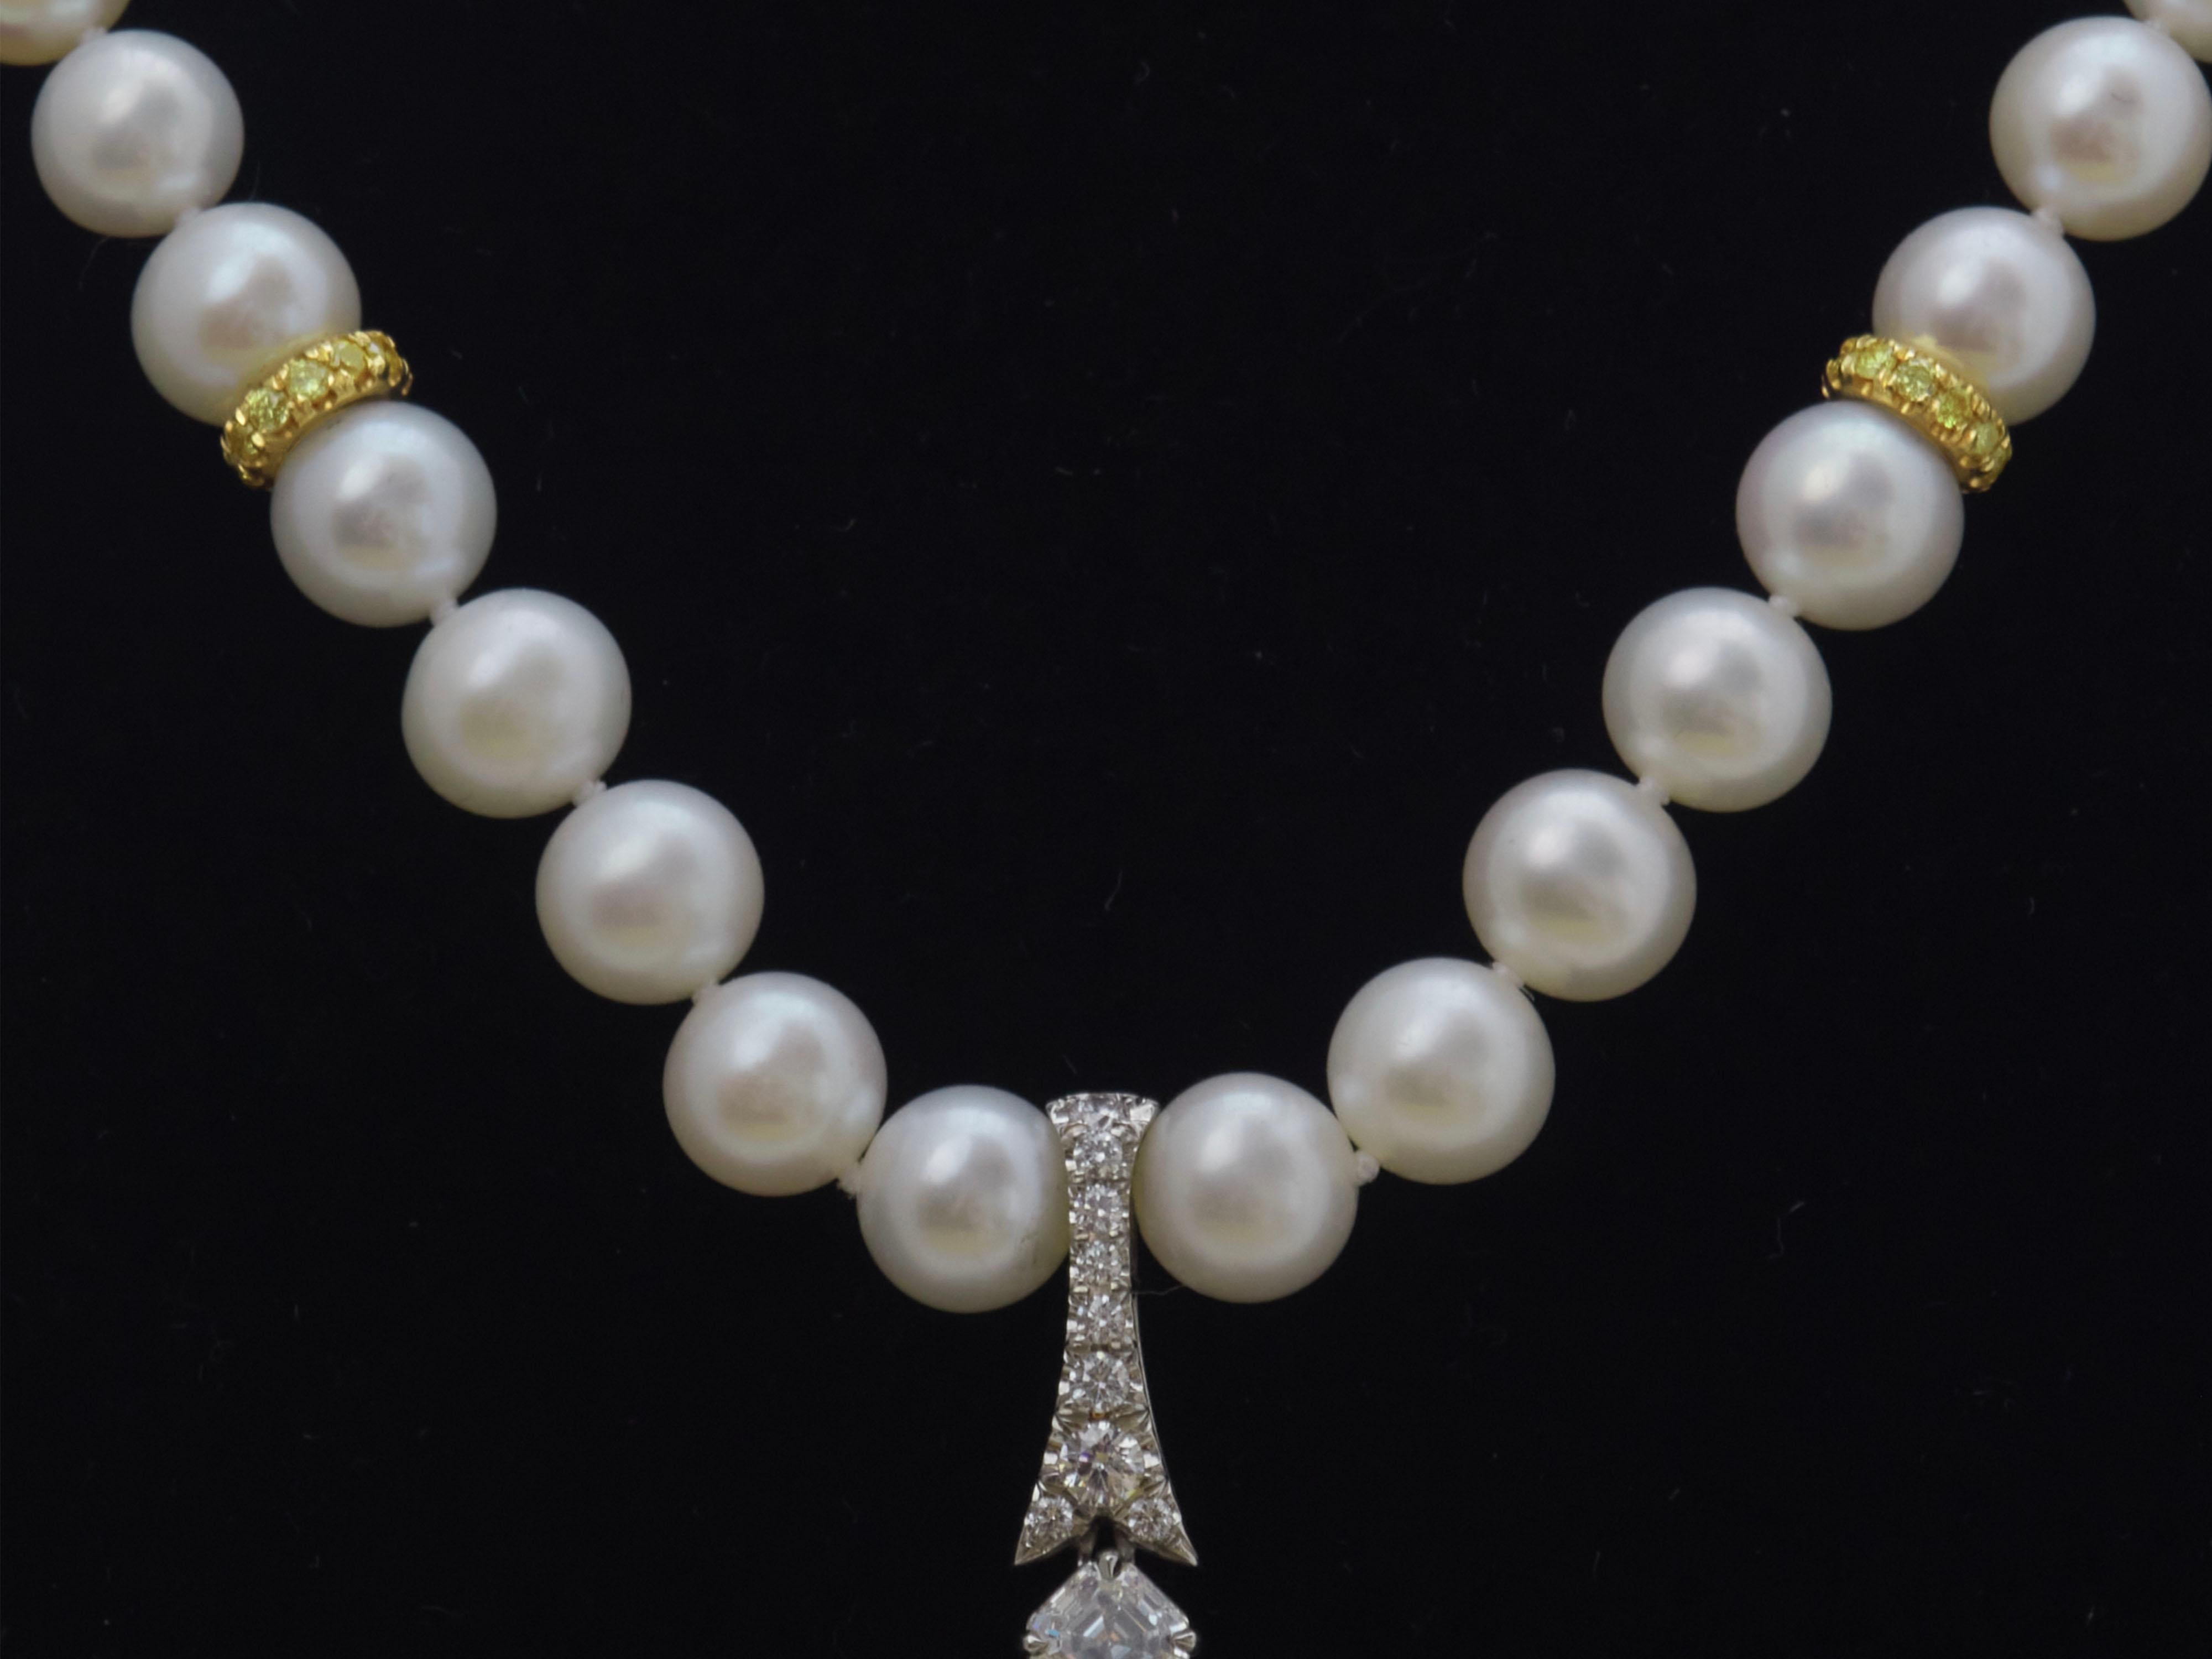 10.36 Carat Vivid Yellow & White Diamonds & Pearls Tassel Necklace, 18K Gold In New Condition For Sale In New York, NY